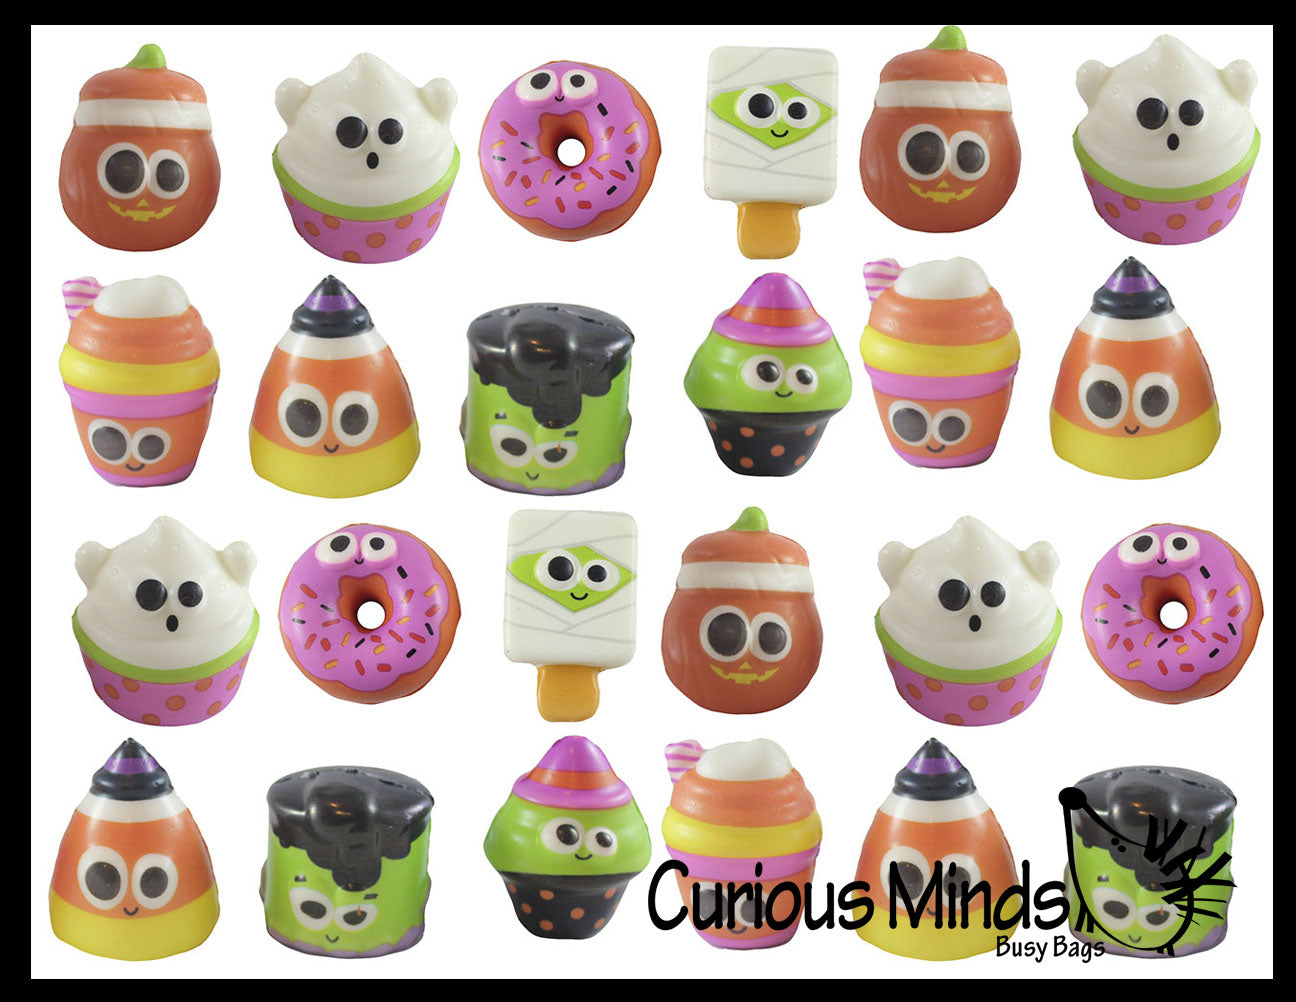 Set of 24 Mini Halloween Themed Slow Rise Squishy Toys - Cute Small Fidget Novelty Toys For Party or Trick or Treating Giveaway (2 Dozen)